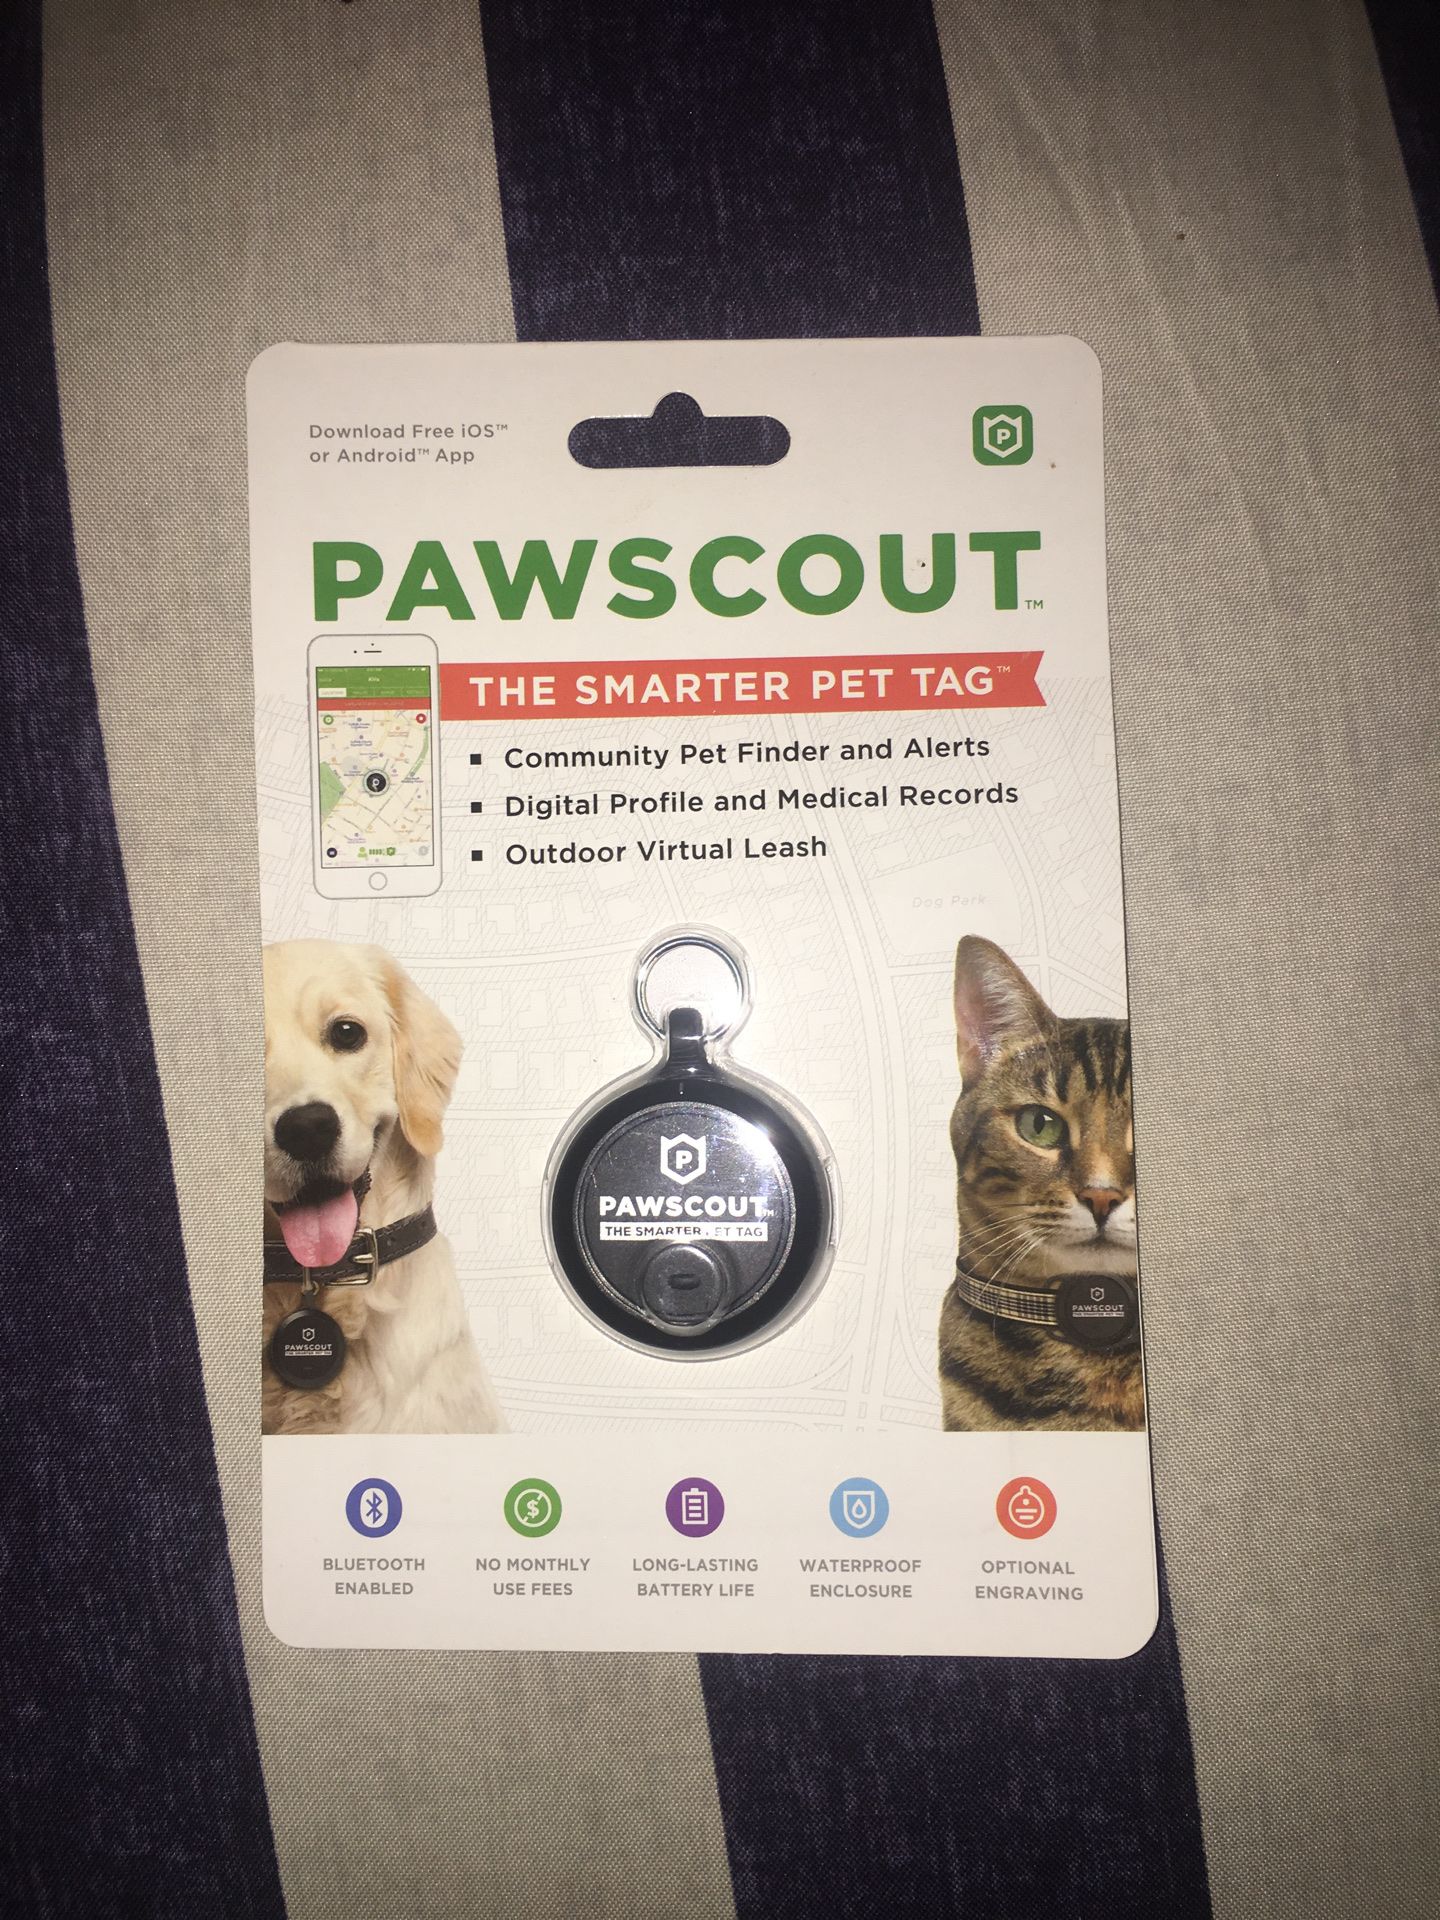 Paw scout